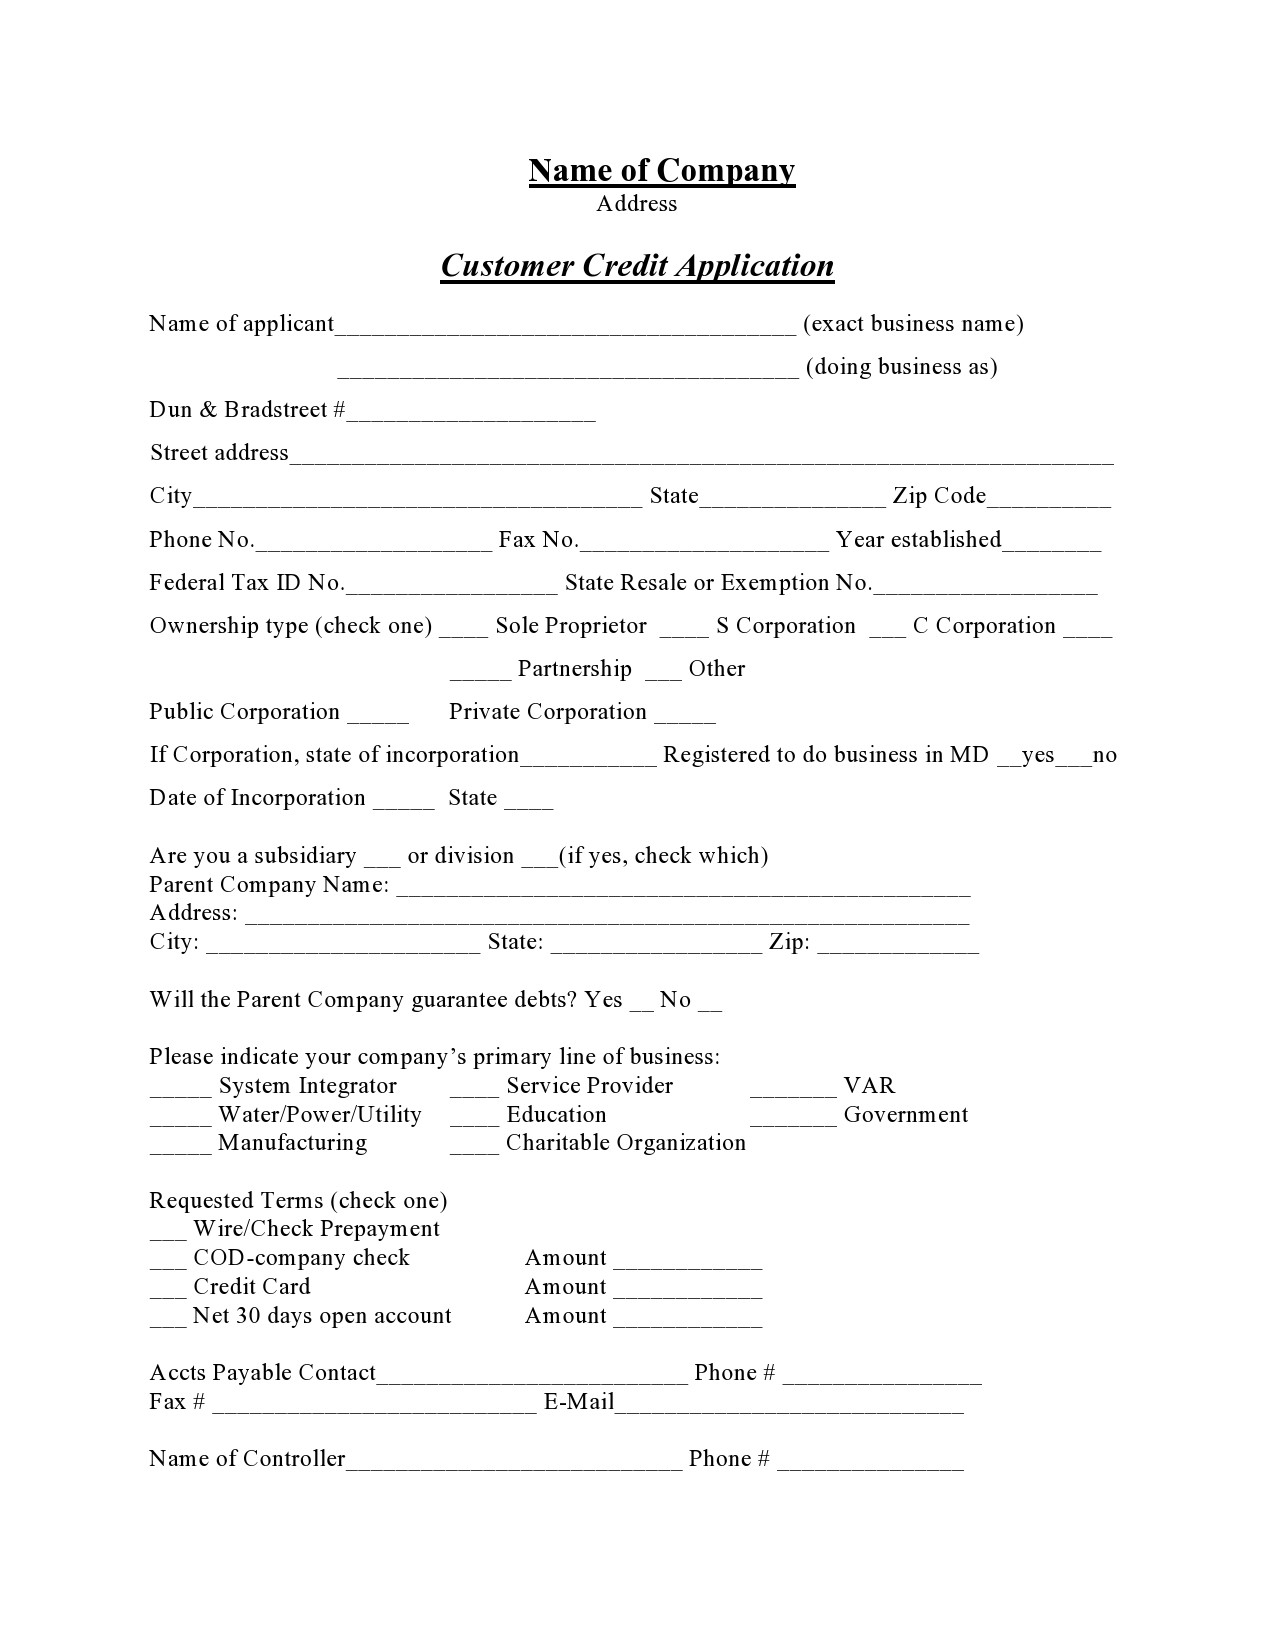 Free business credit application 26